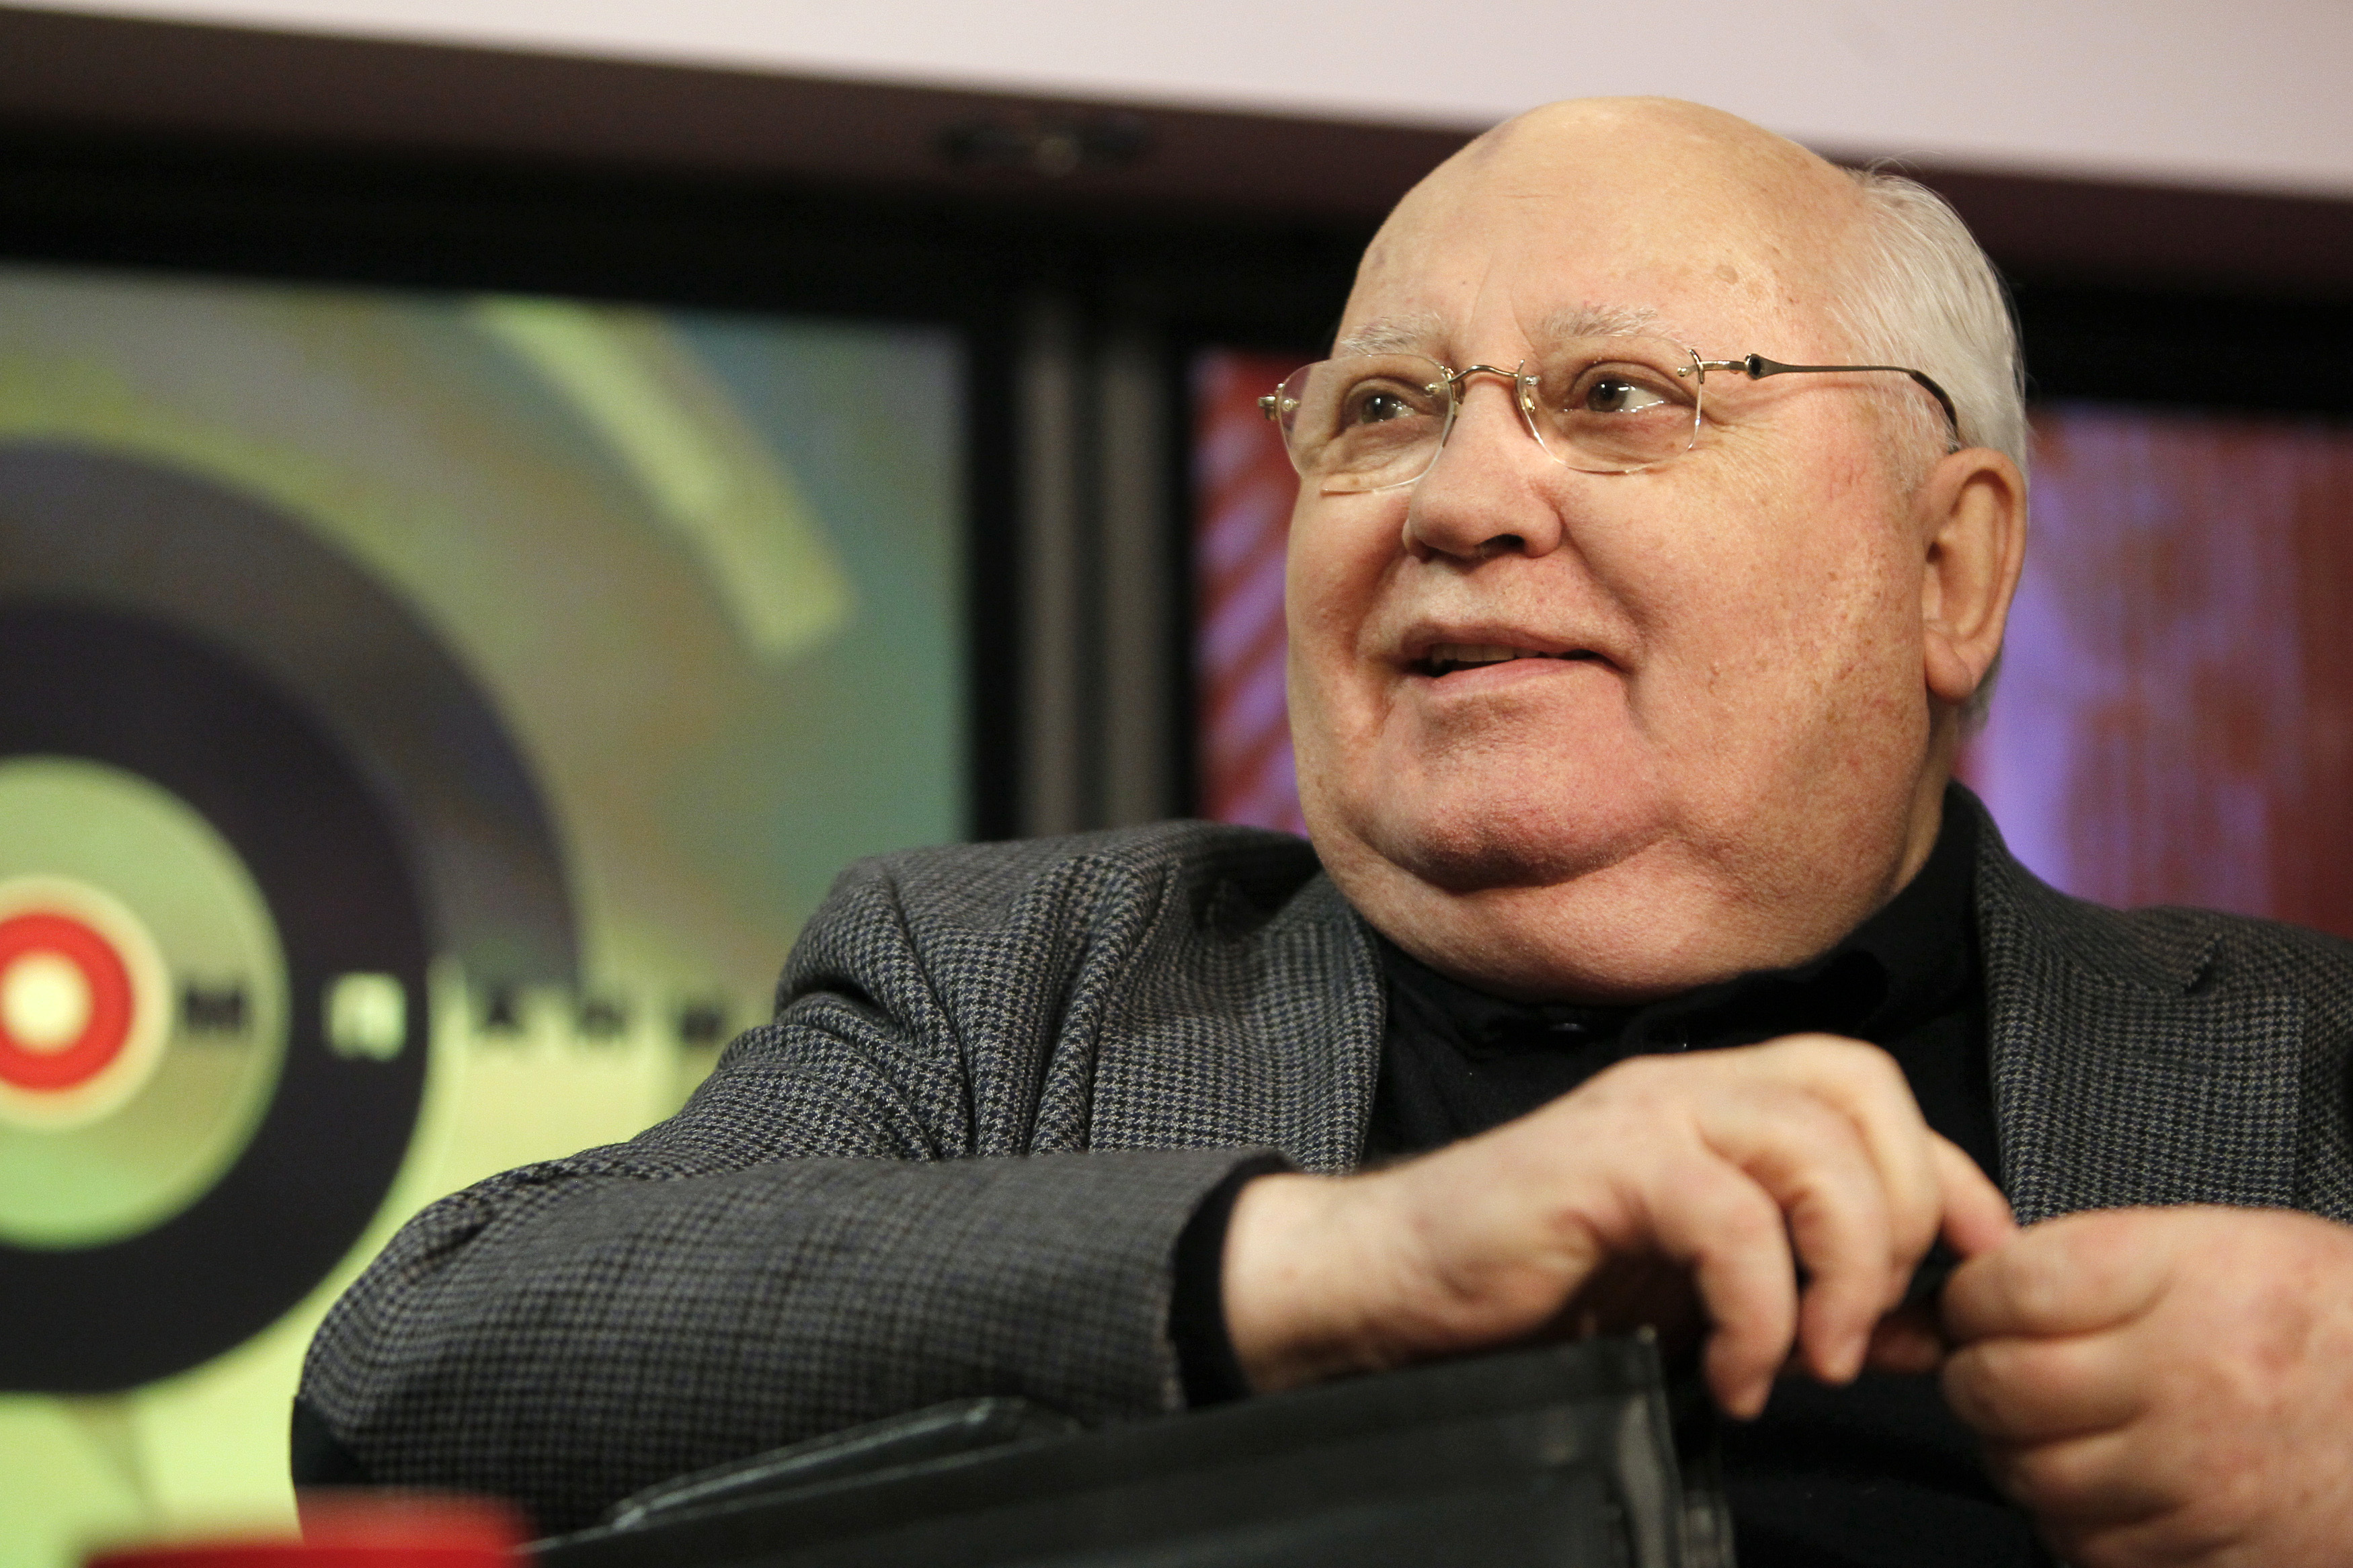 Former Soviet President Gorbachev smiles during an interview in Moscow